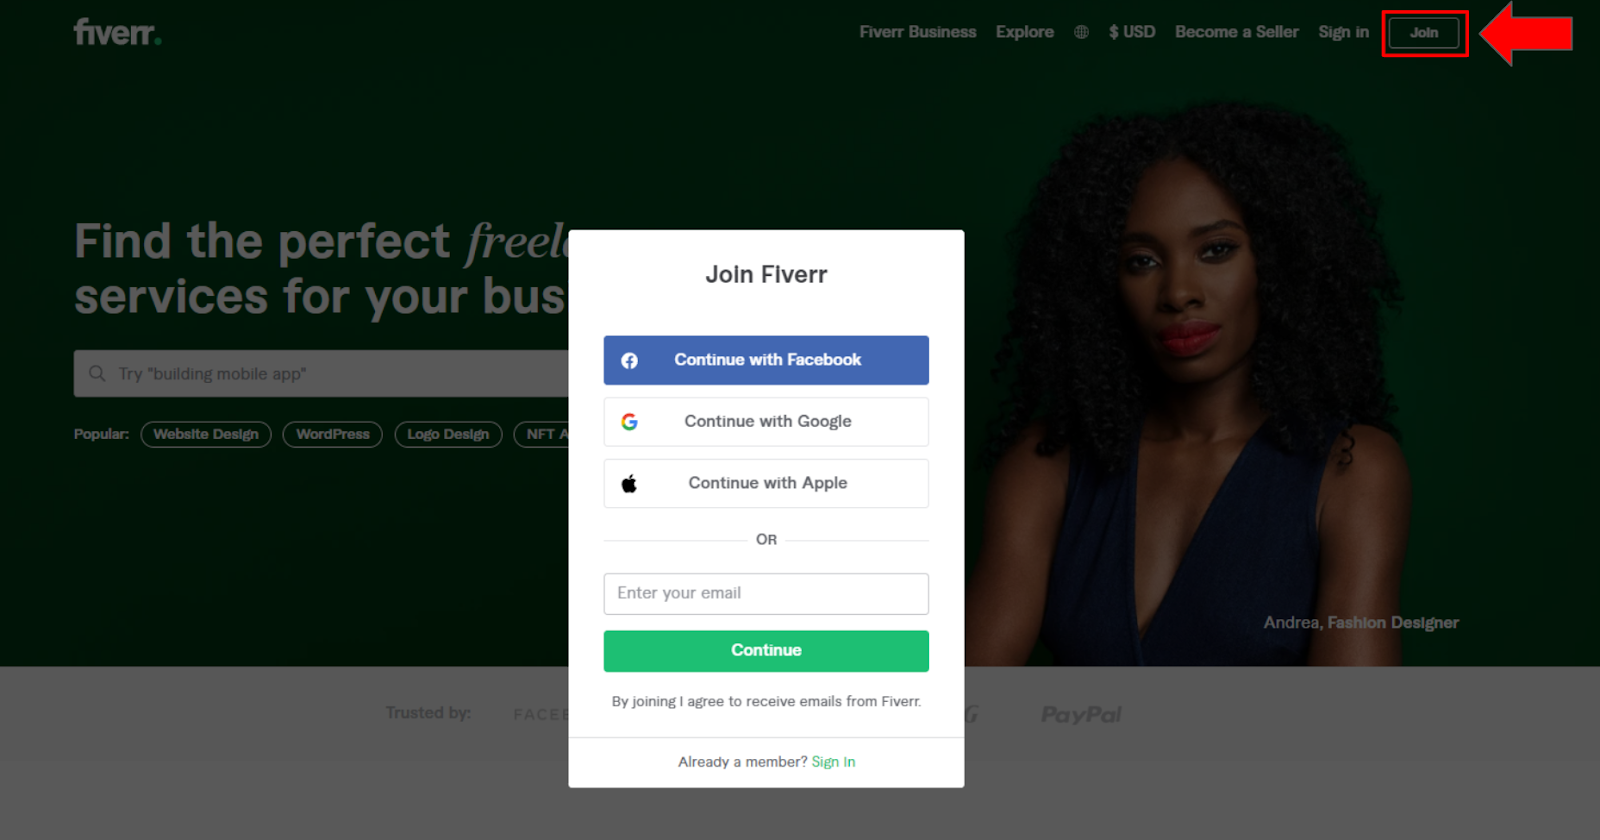 'Join' Fiverr button and sign up form - Fiverr homepage